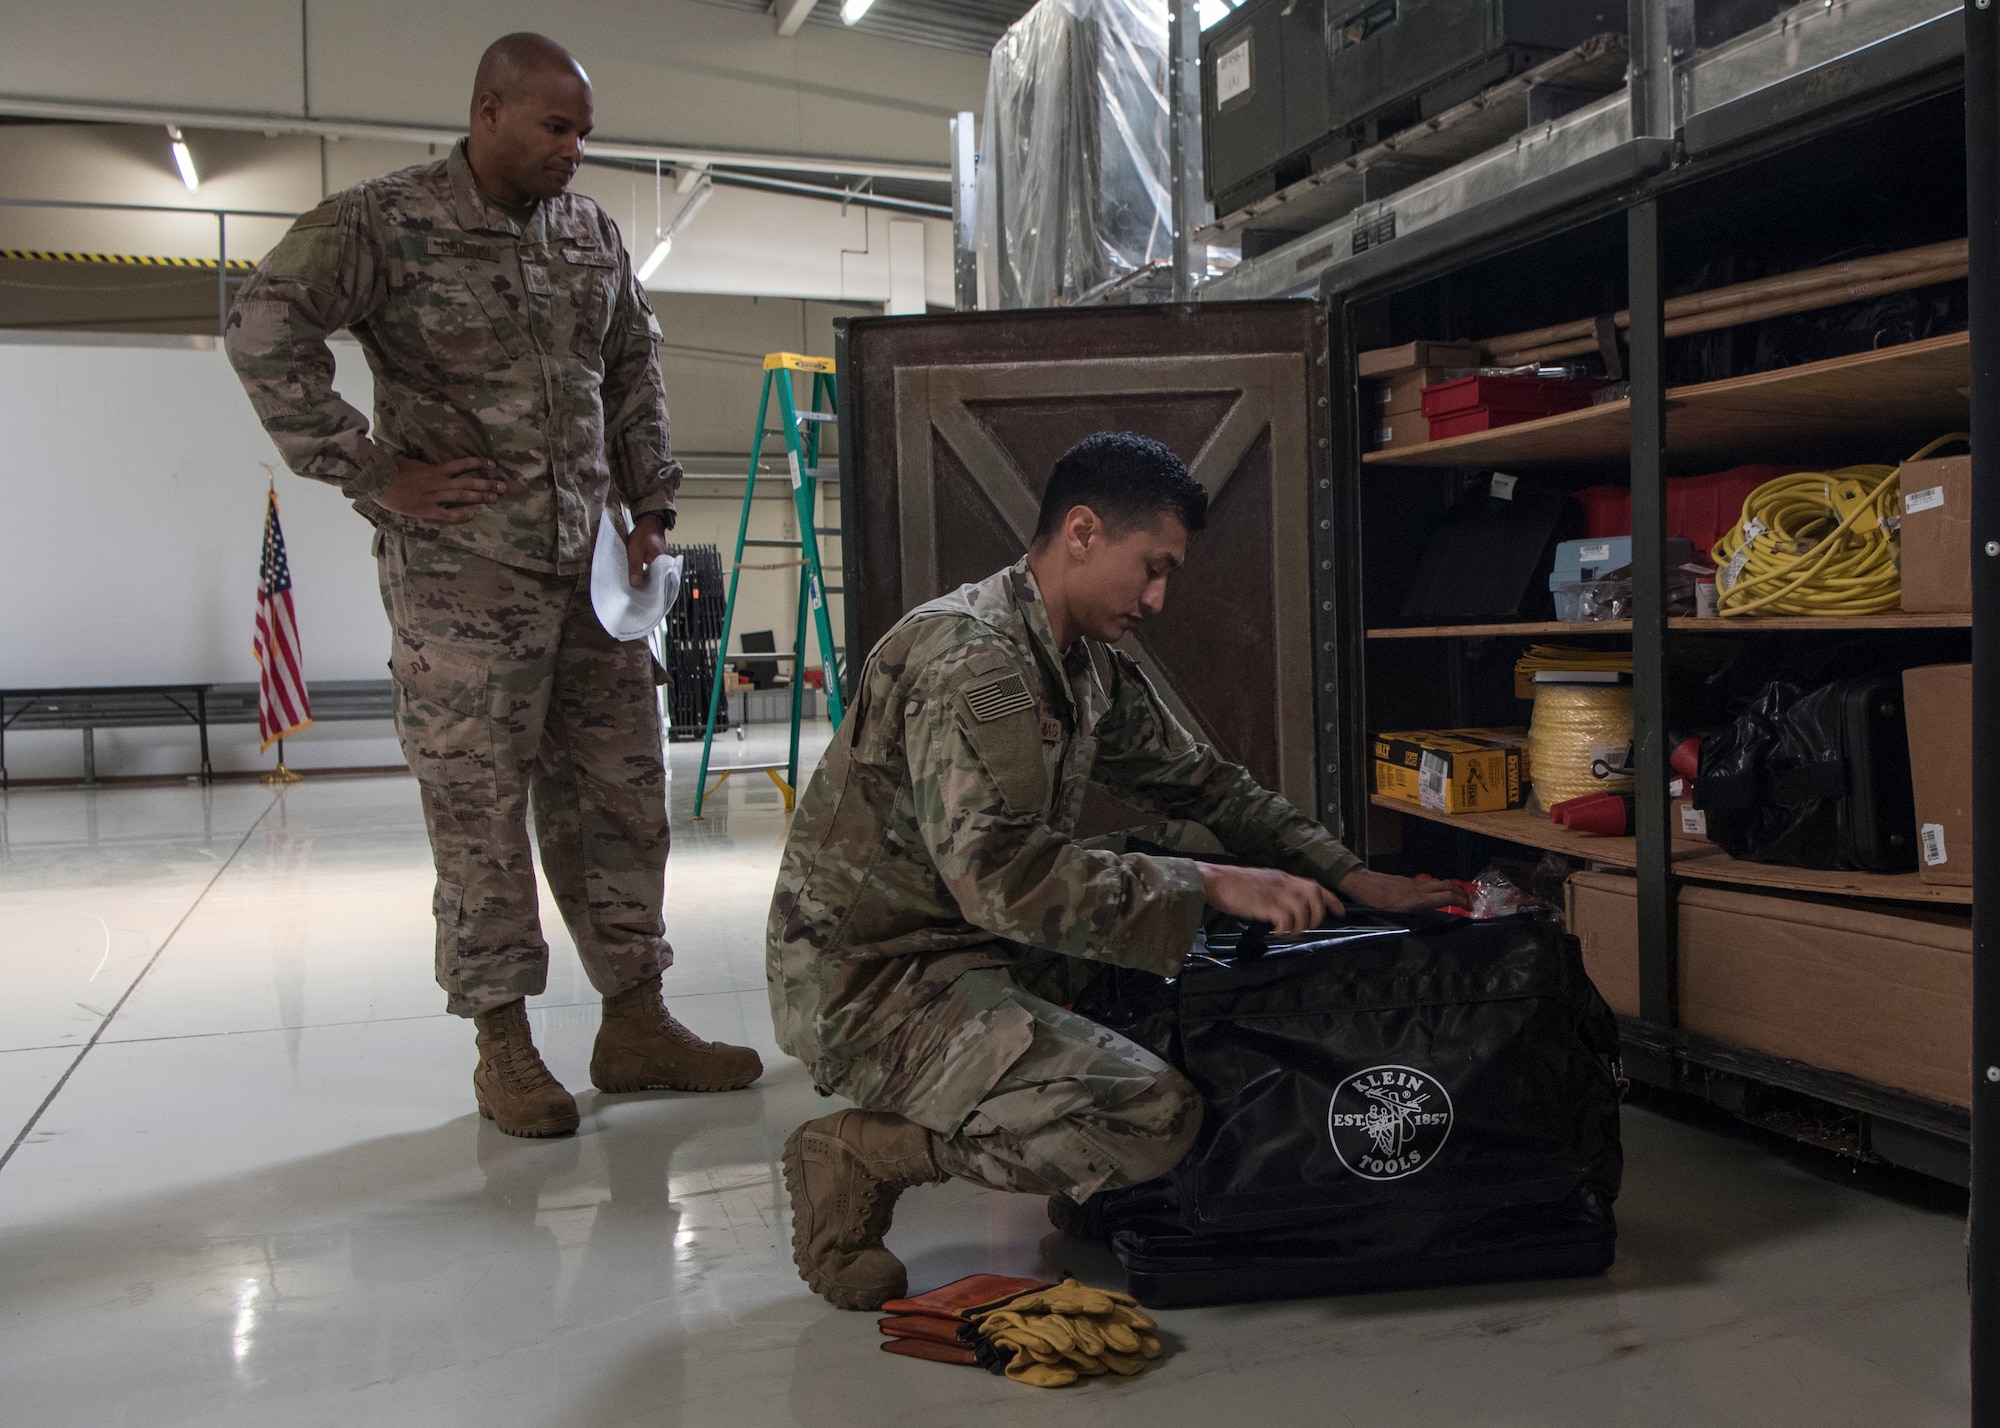 U.S. Air Force Tech. Sgt. Graeme Clouden, left, and Staff Sgt. Abraham Farias, 786th Civil Engineer Squadron expeditionary engineering training managers, inspect a supply bag for CE linemen at Ramstein Air Base, Germany, April 23, 2020